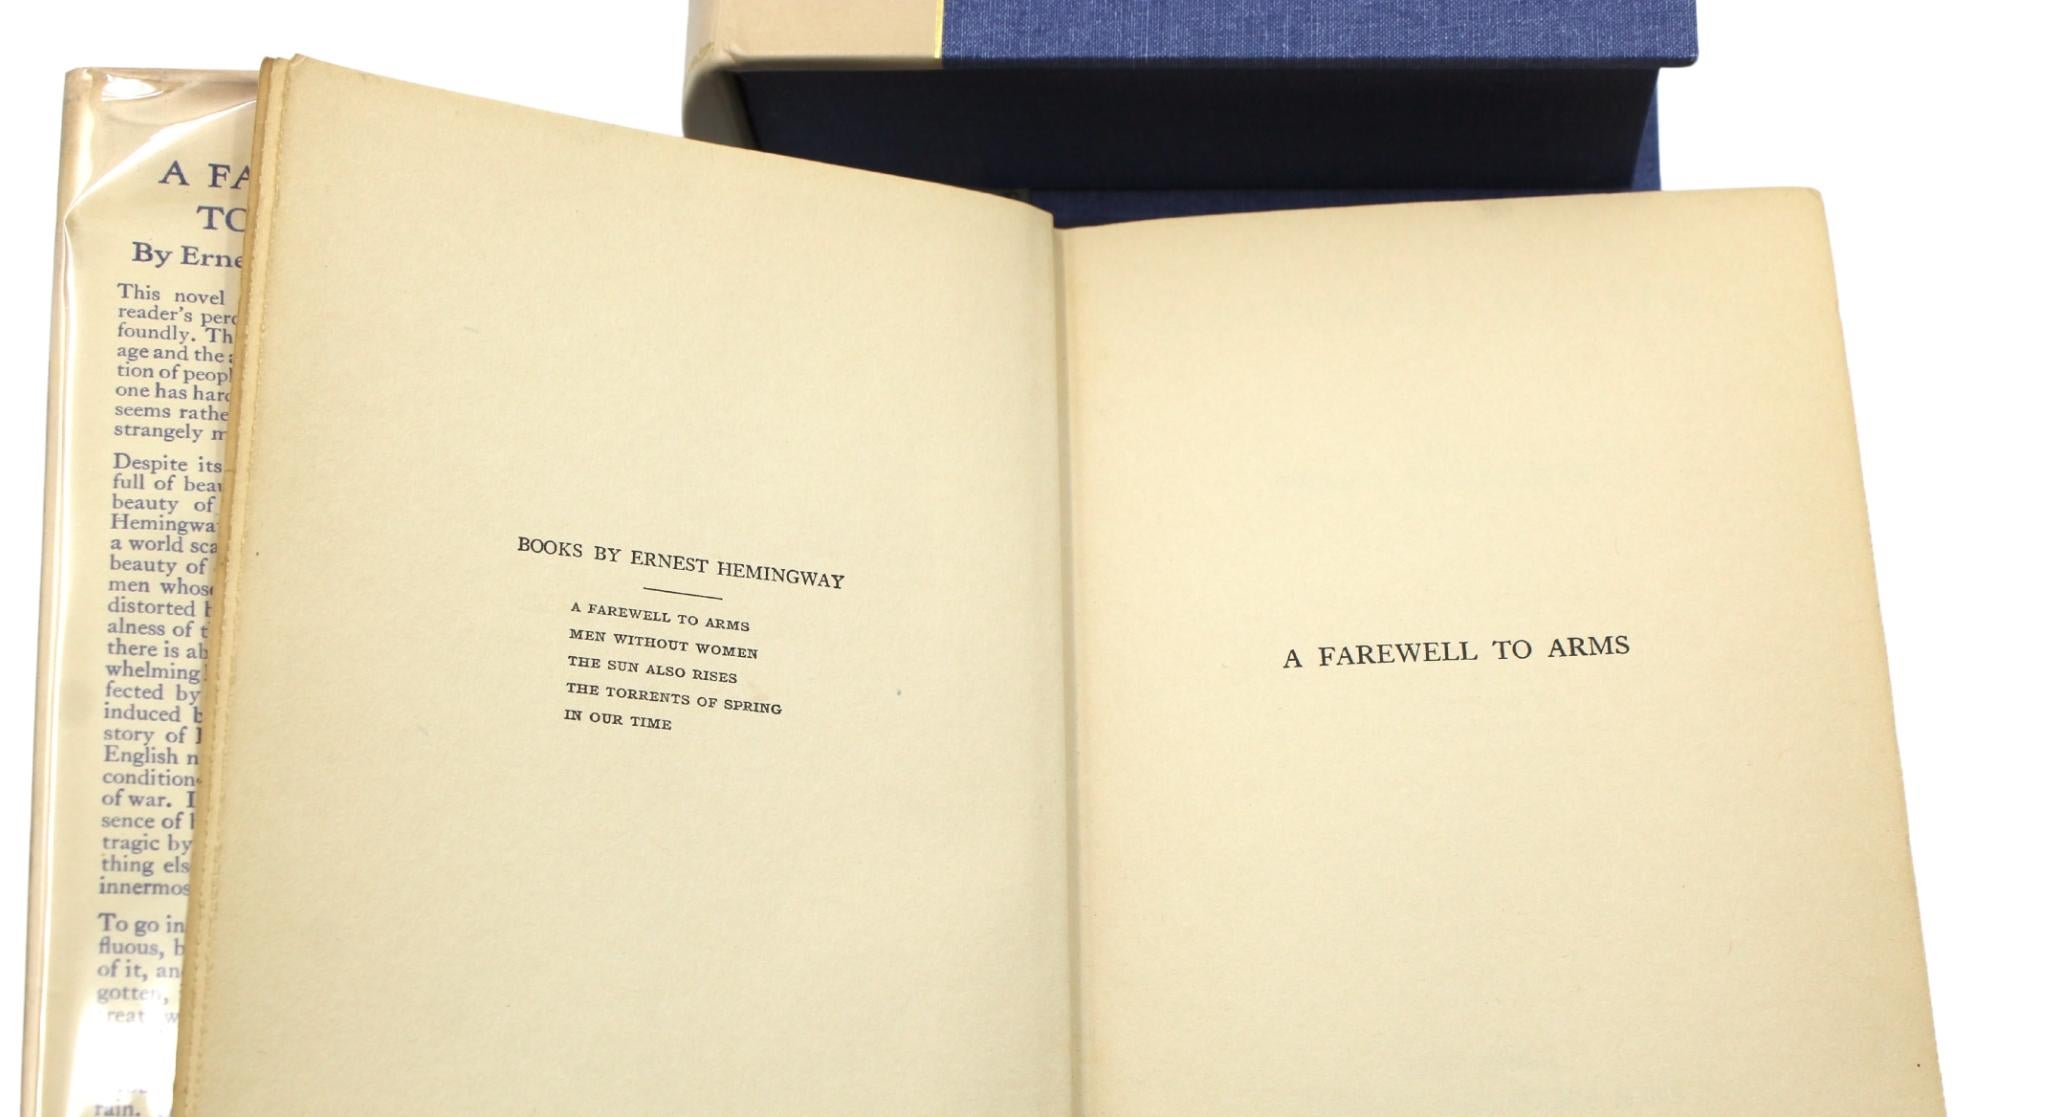 American A Farewell to Arms by Ernest Hemingway, First Trade Edition, in Dust Jacket For Sale